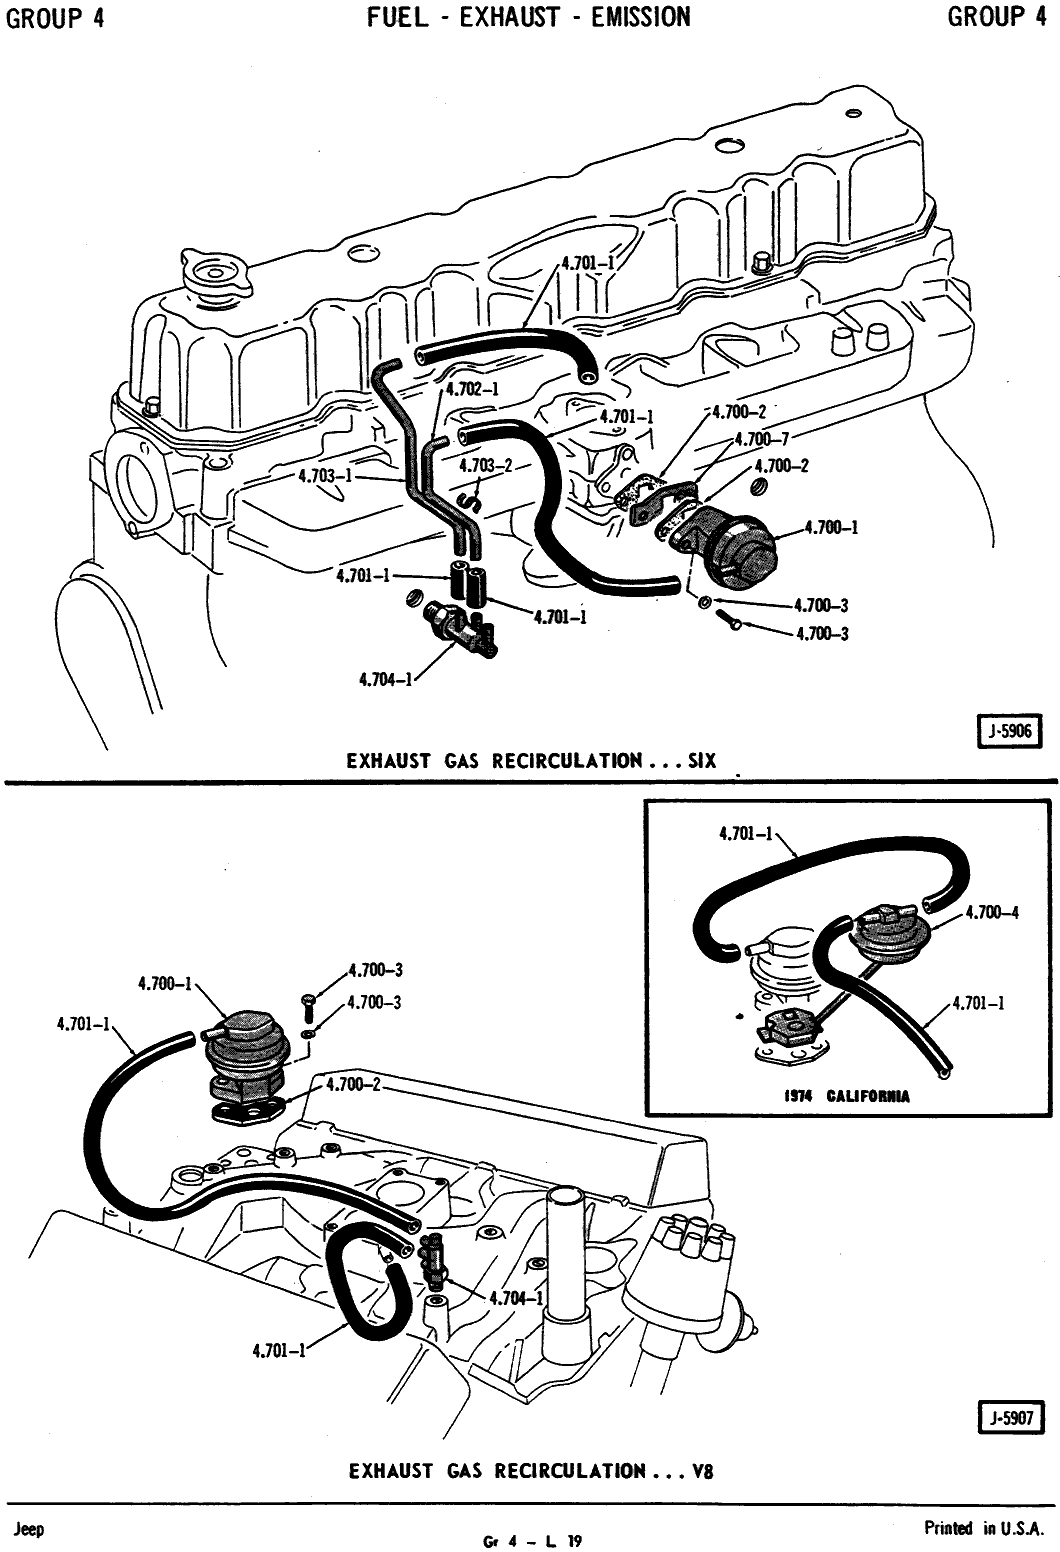 Troubleshooting a jeep cherokee fuel pump #5